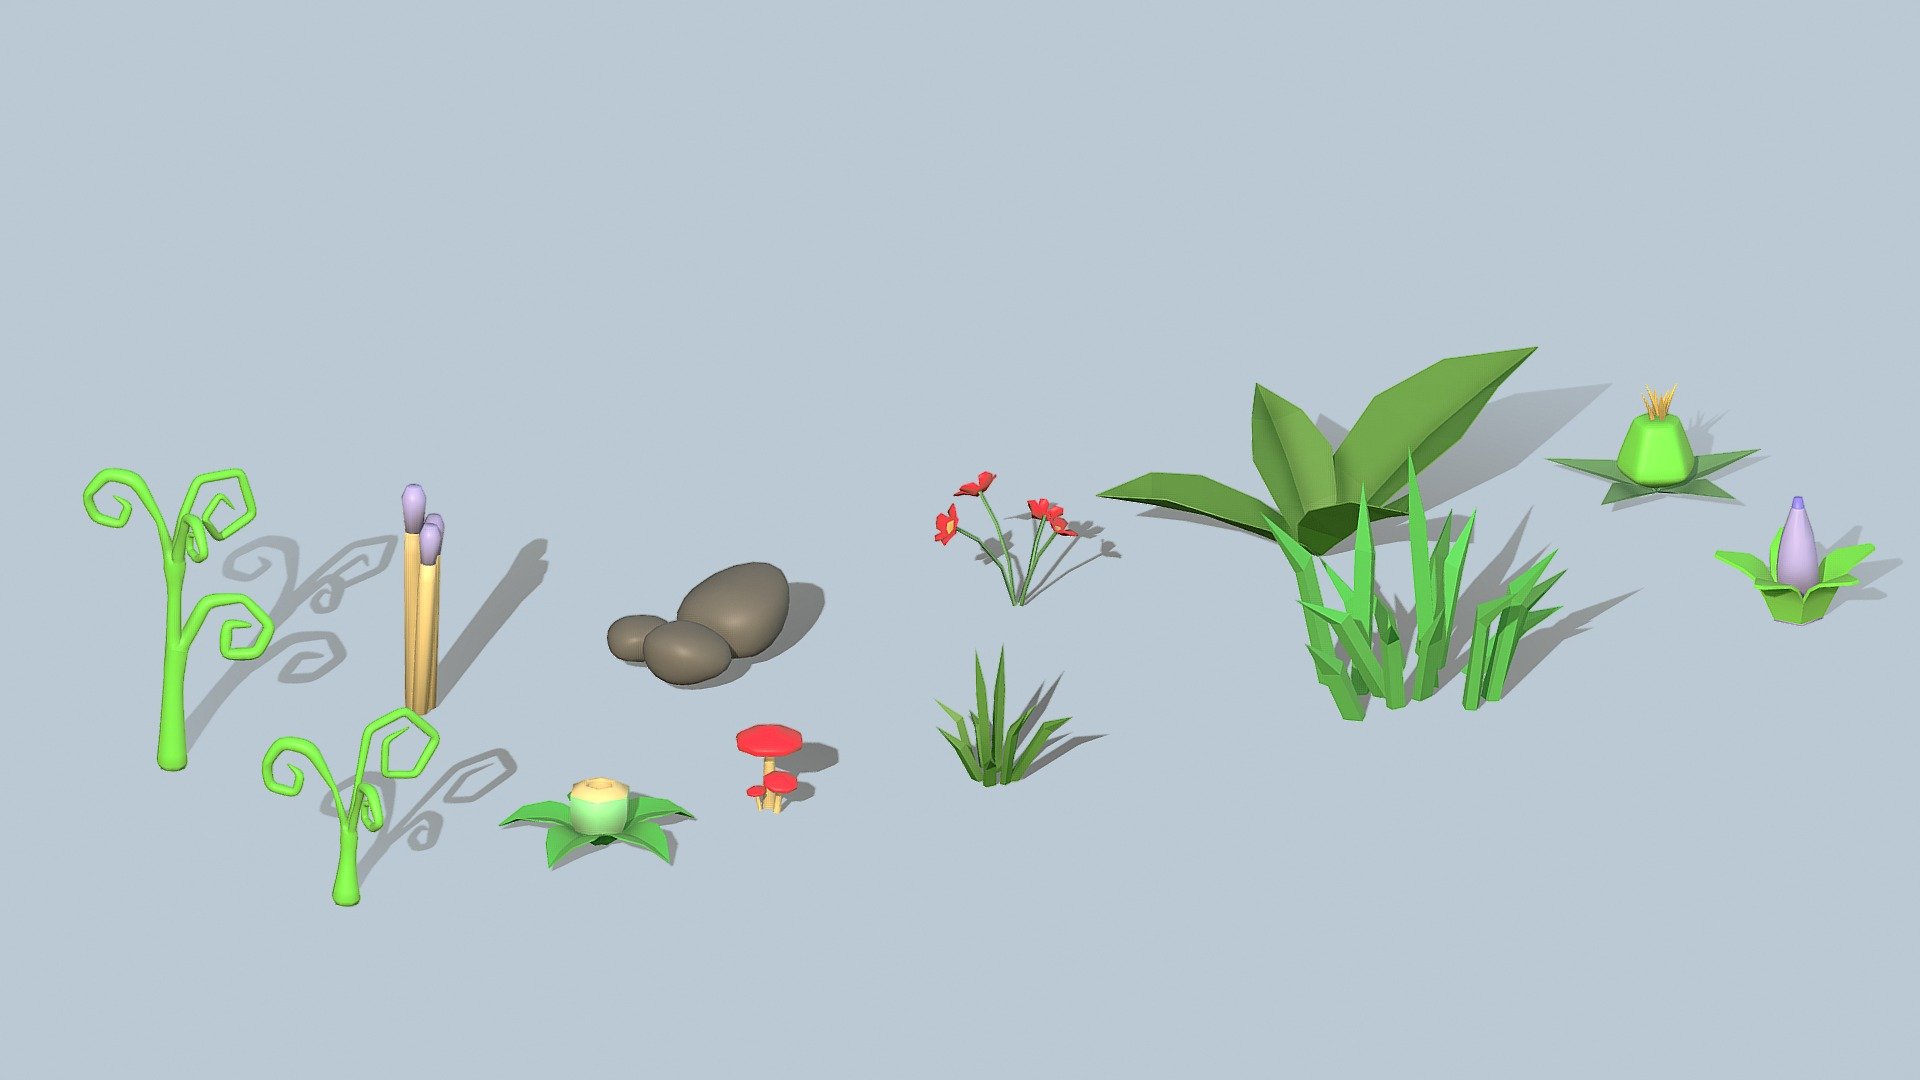 This pack contains 12 extremely low poly plants.

➖➖➖➖➖➖➖➖➖➖➖➖➖➖➖➖➖➖➖➖➖➖➖➖➖➖➖➖

➖➖➖You need any  type of 3D model? Let’s talk! nizarzayto@gmail.com➖➖➖

➖➖➖➖➖➖➖➖➖➖➖➖➖➖➖➖➖➖➖➖➖➖➖➖➖➖➖➖ - low poly plantes - Buy Royalty Free 3D model by N1x 3d model